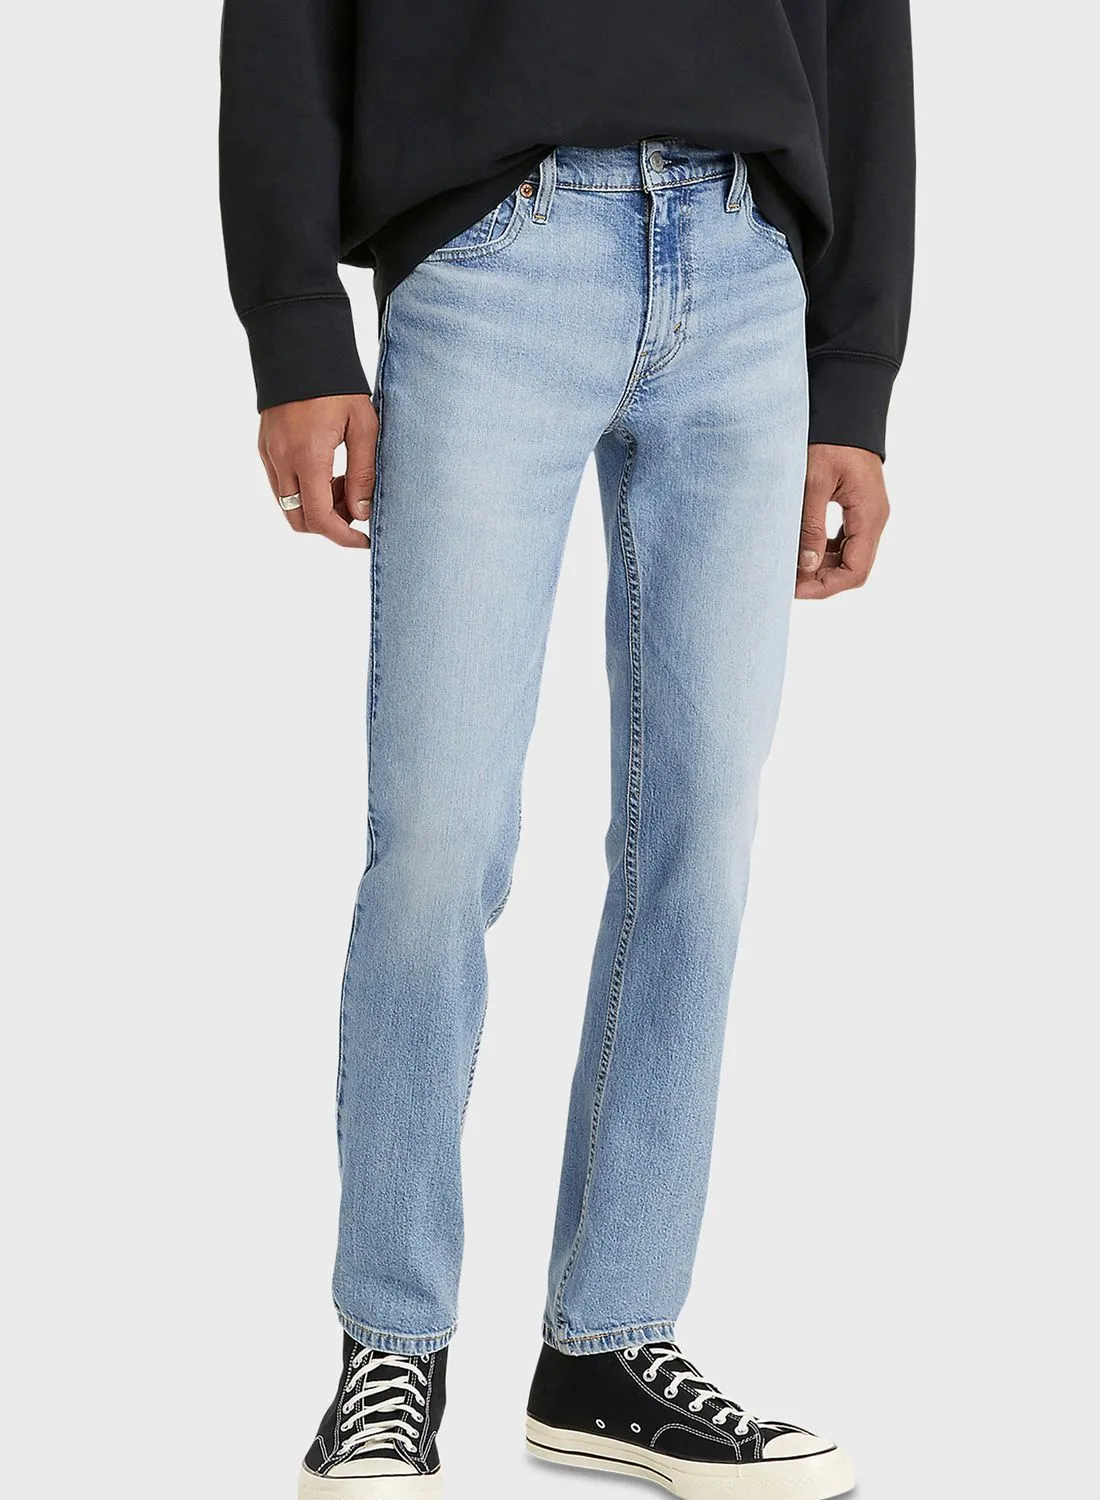 Levi's Light Wash Straight Fit Jeans